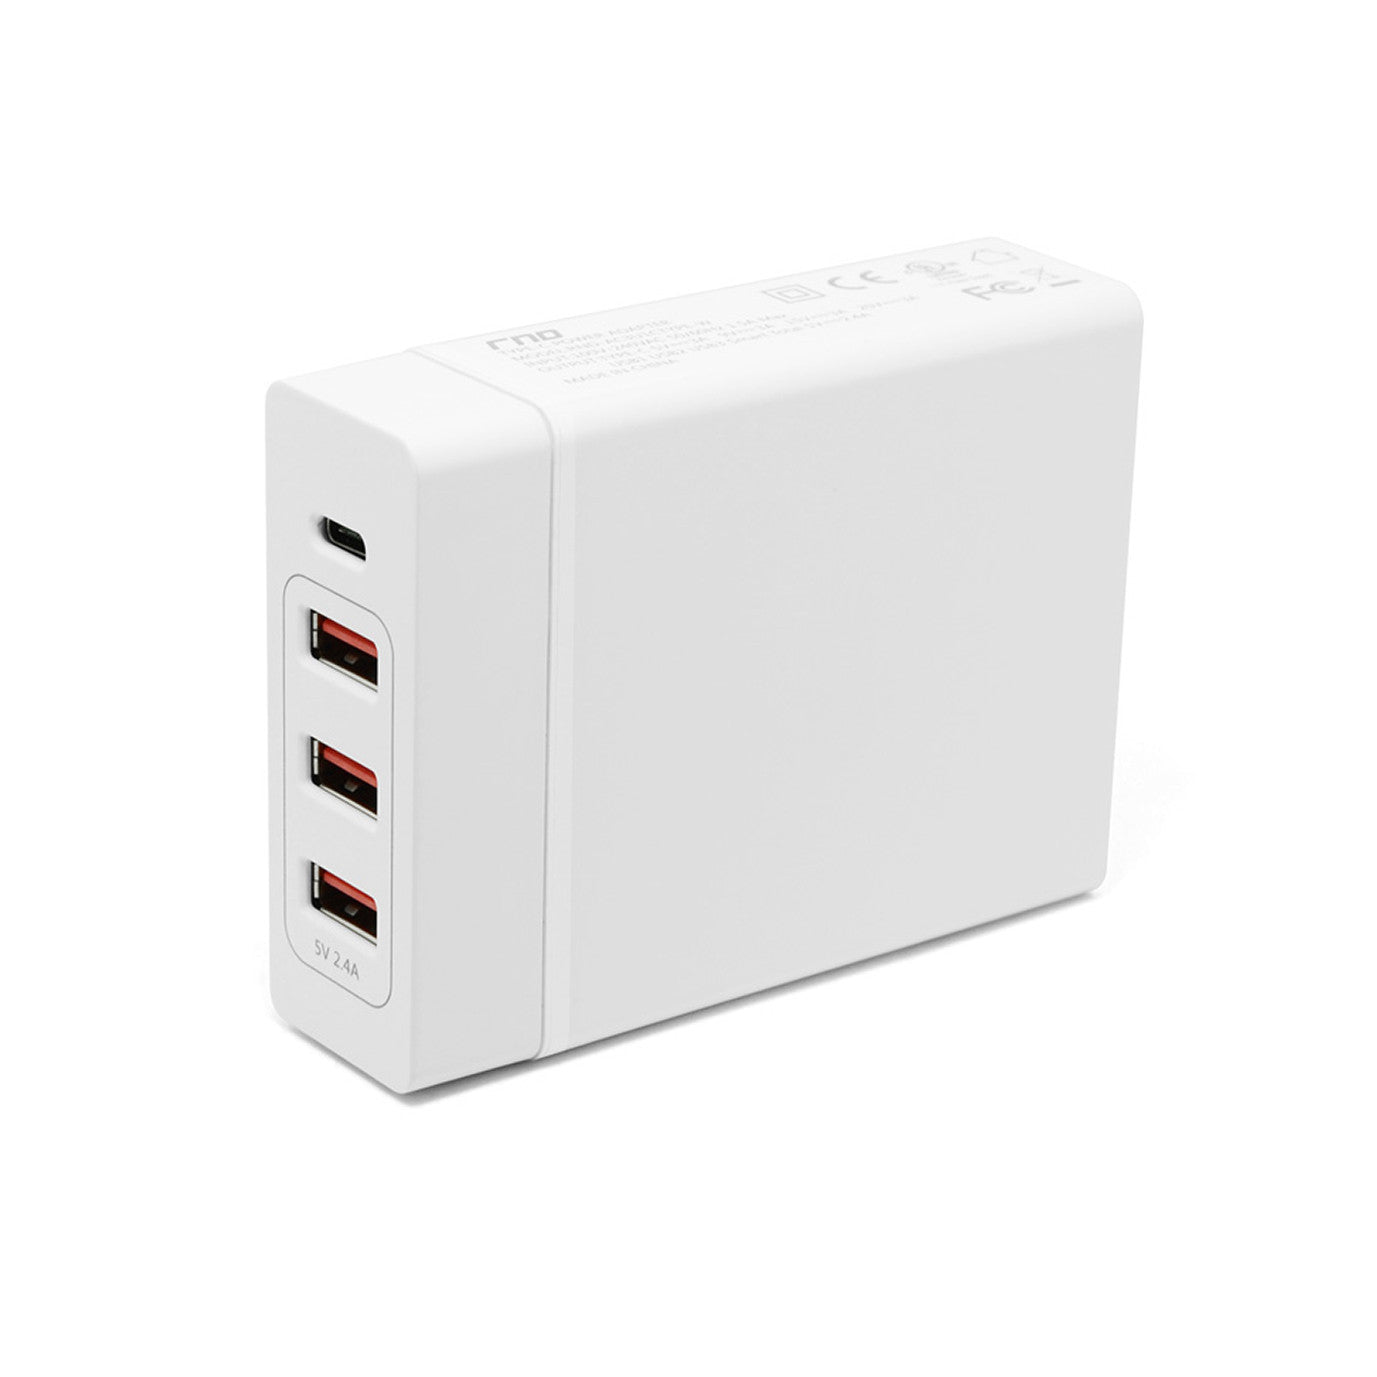 White portable 3 usb charging station with one Type-C Port